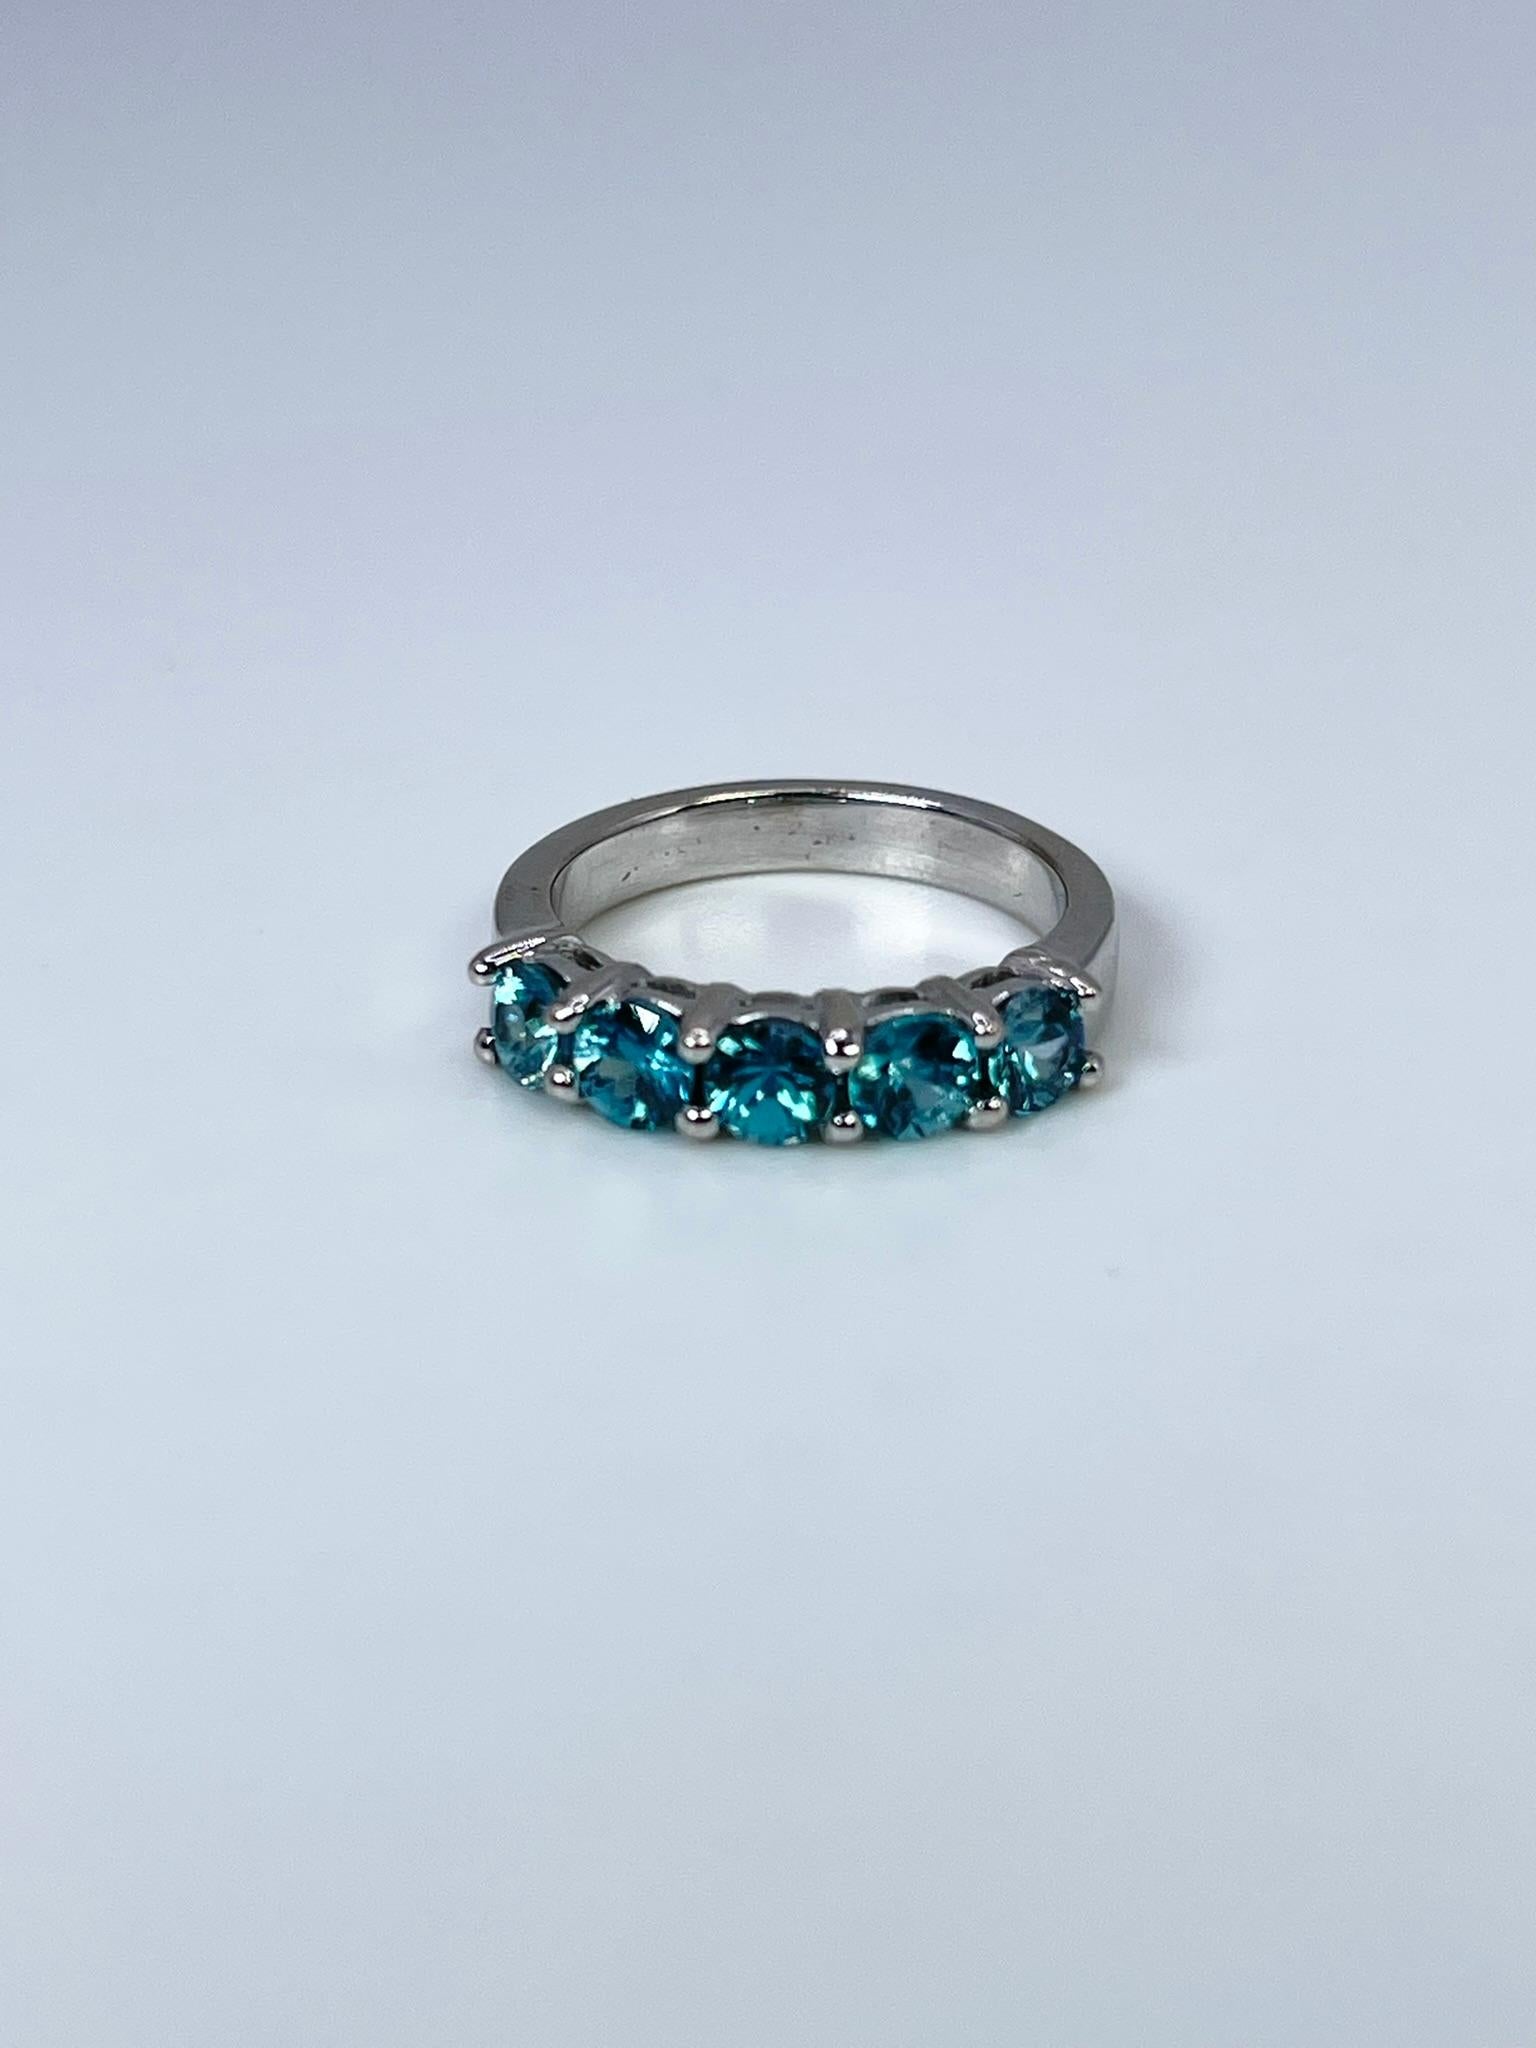 Stunning natural zircon in 14KT white gold. The blue zircon is a natural gemstone with stunning sparkle and saturated uniformed blue color.

GRAM WEIGHT: 4.35gr
GOLD: 14KT white gold
GEMSTONE: Natural Zircon 
CLARITY/COLOR: Slightly